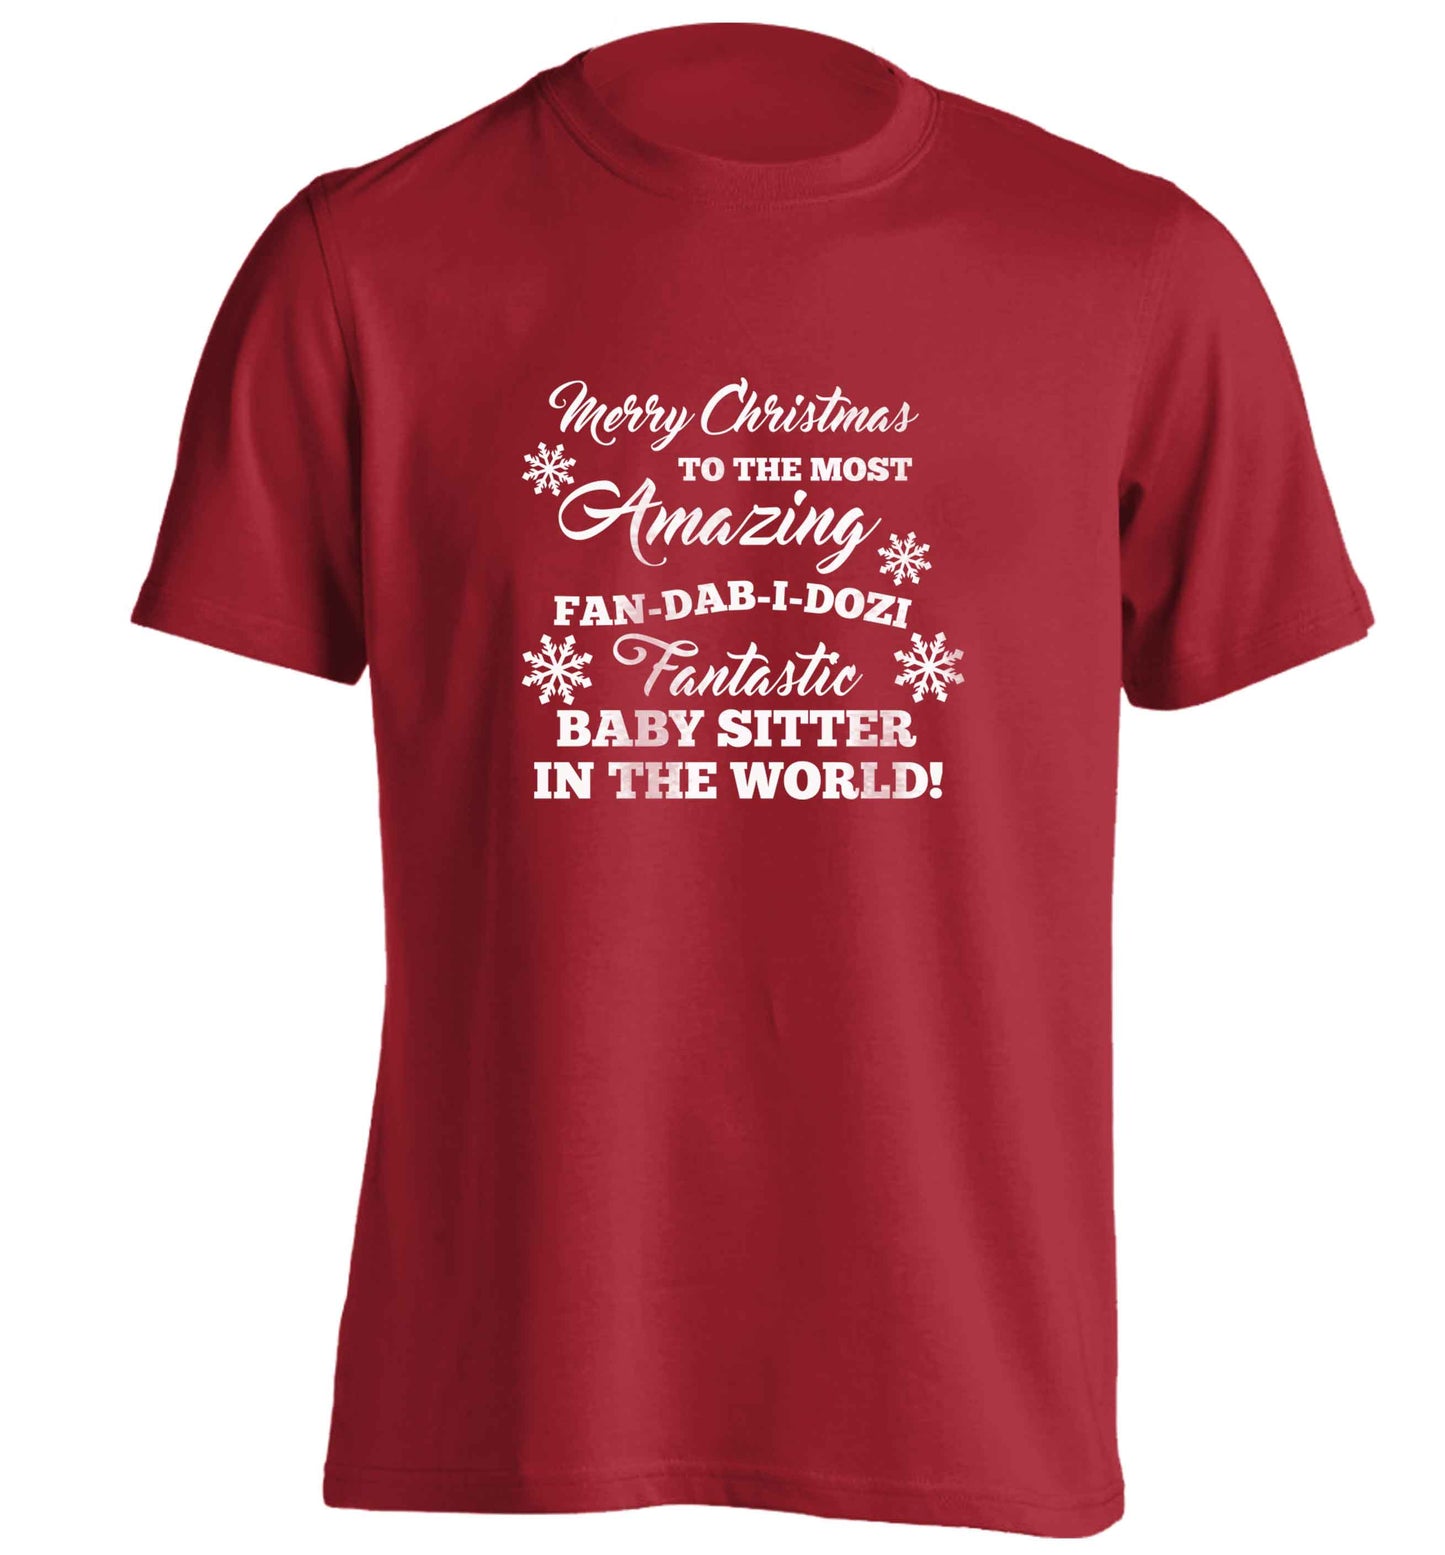 Merry Christmas to the most amazing fan-dab-i-dozi fantasic baby sitter in the world adults unisex red Tshirt 2XL